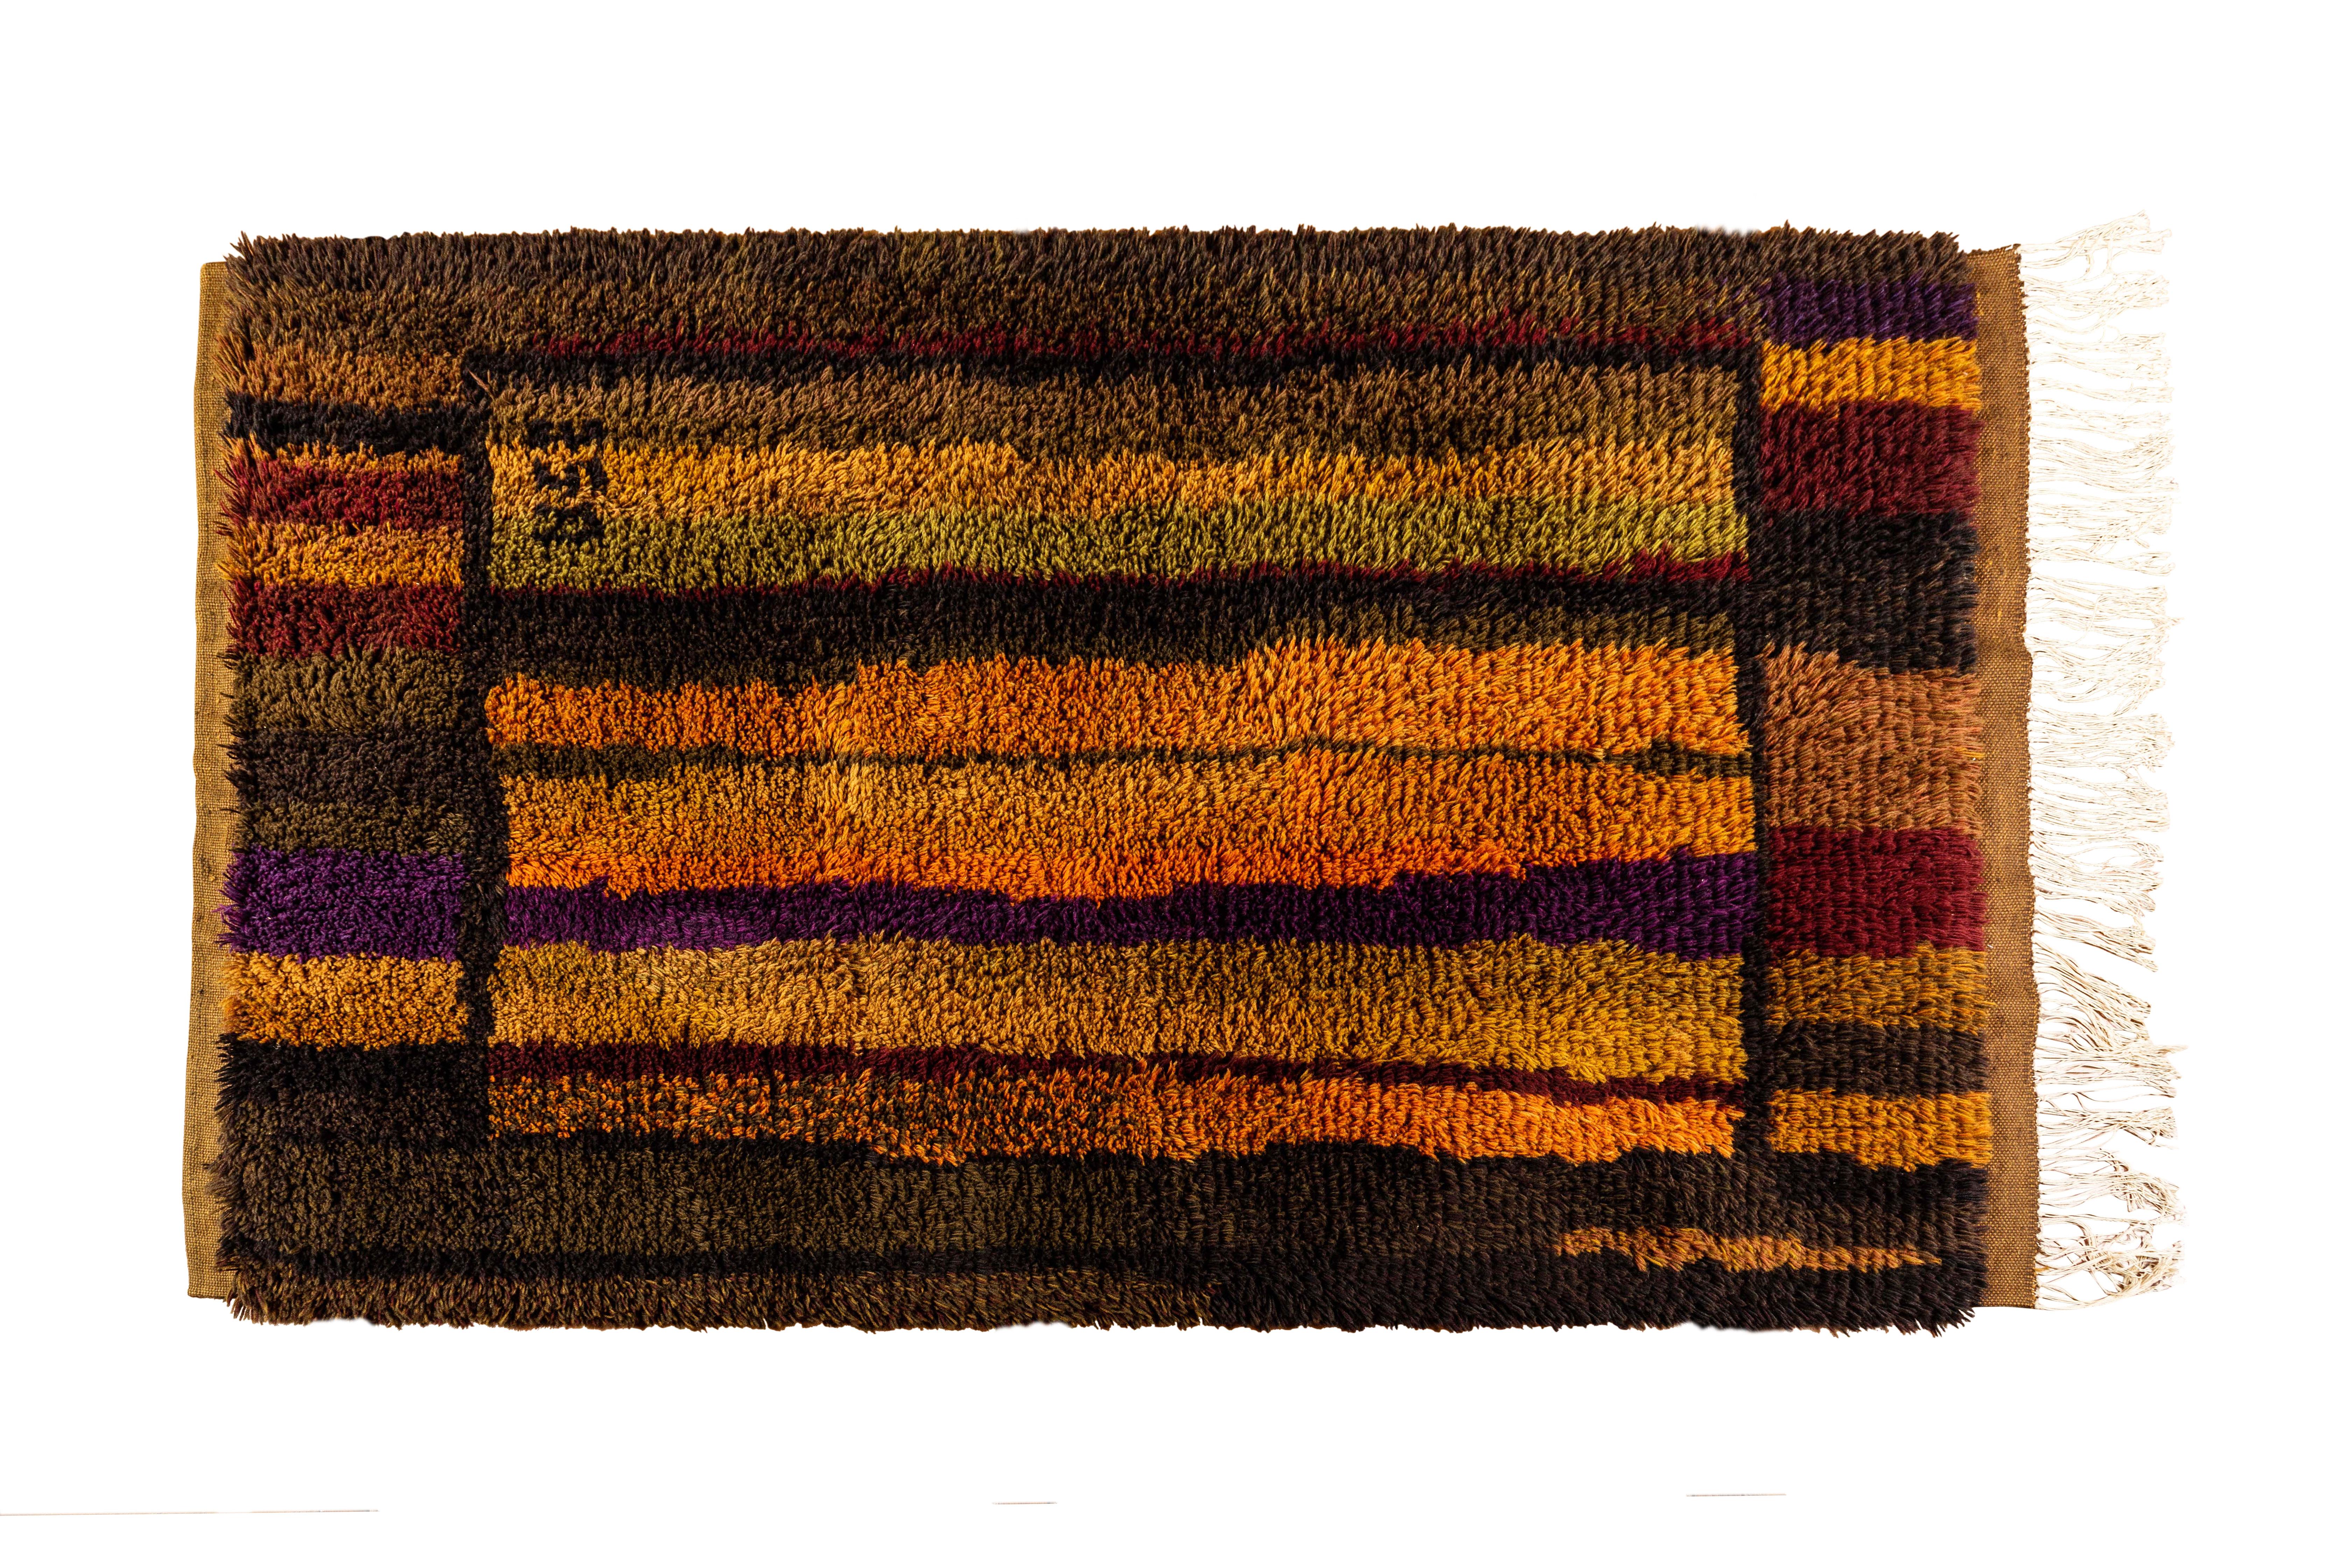 Rare Uhra Beata Simberg-Ehrström 'Ruska' Finnish rug, circa 1968. A stunning geometric rug executed in handwoven wool celebrating the colors of autumn. Rich texture and modern abstract lines artfully woven into the high pile. Measures 68 inches long